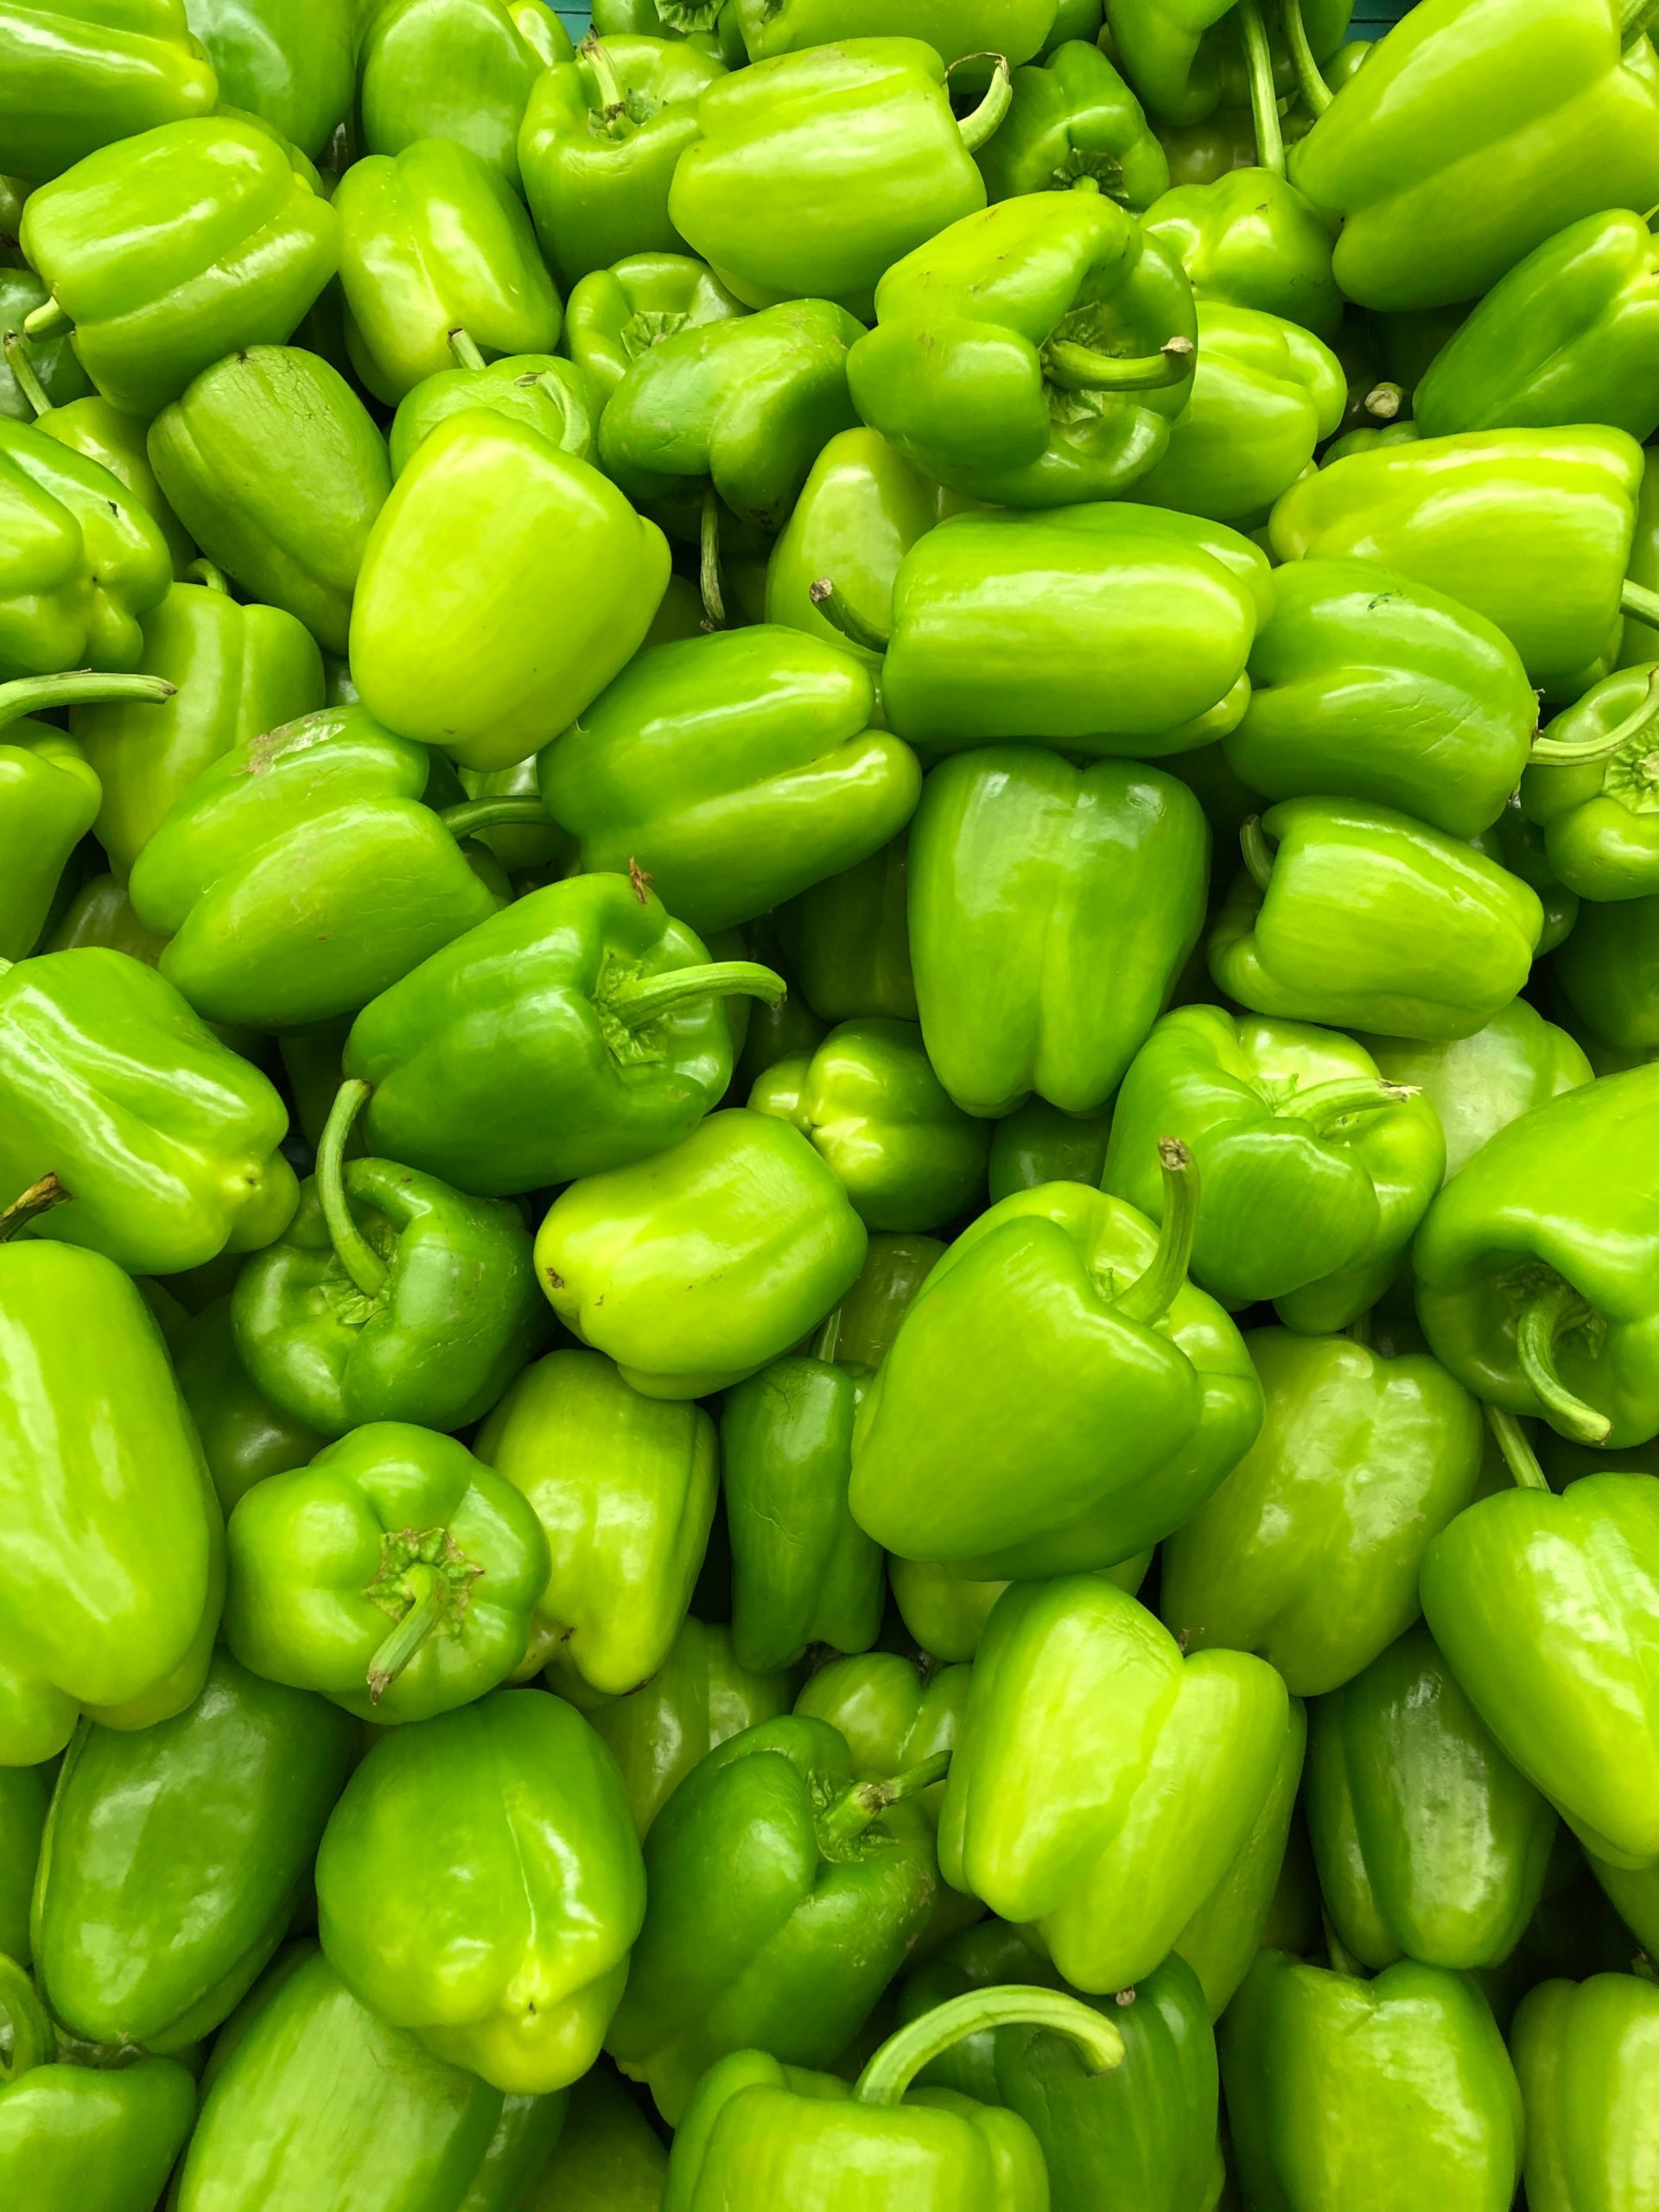 lots of green bell peppers